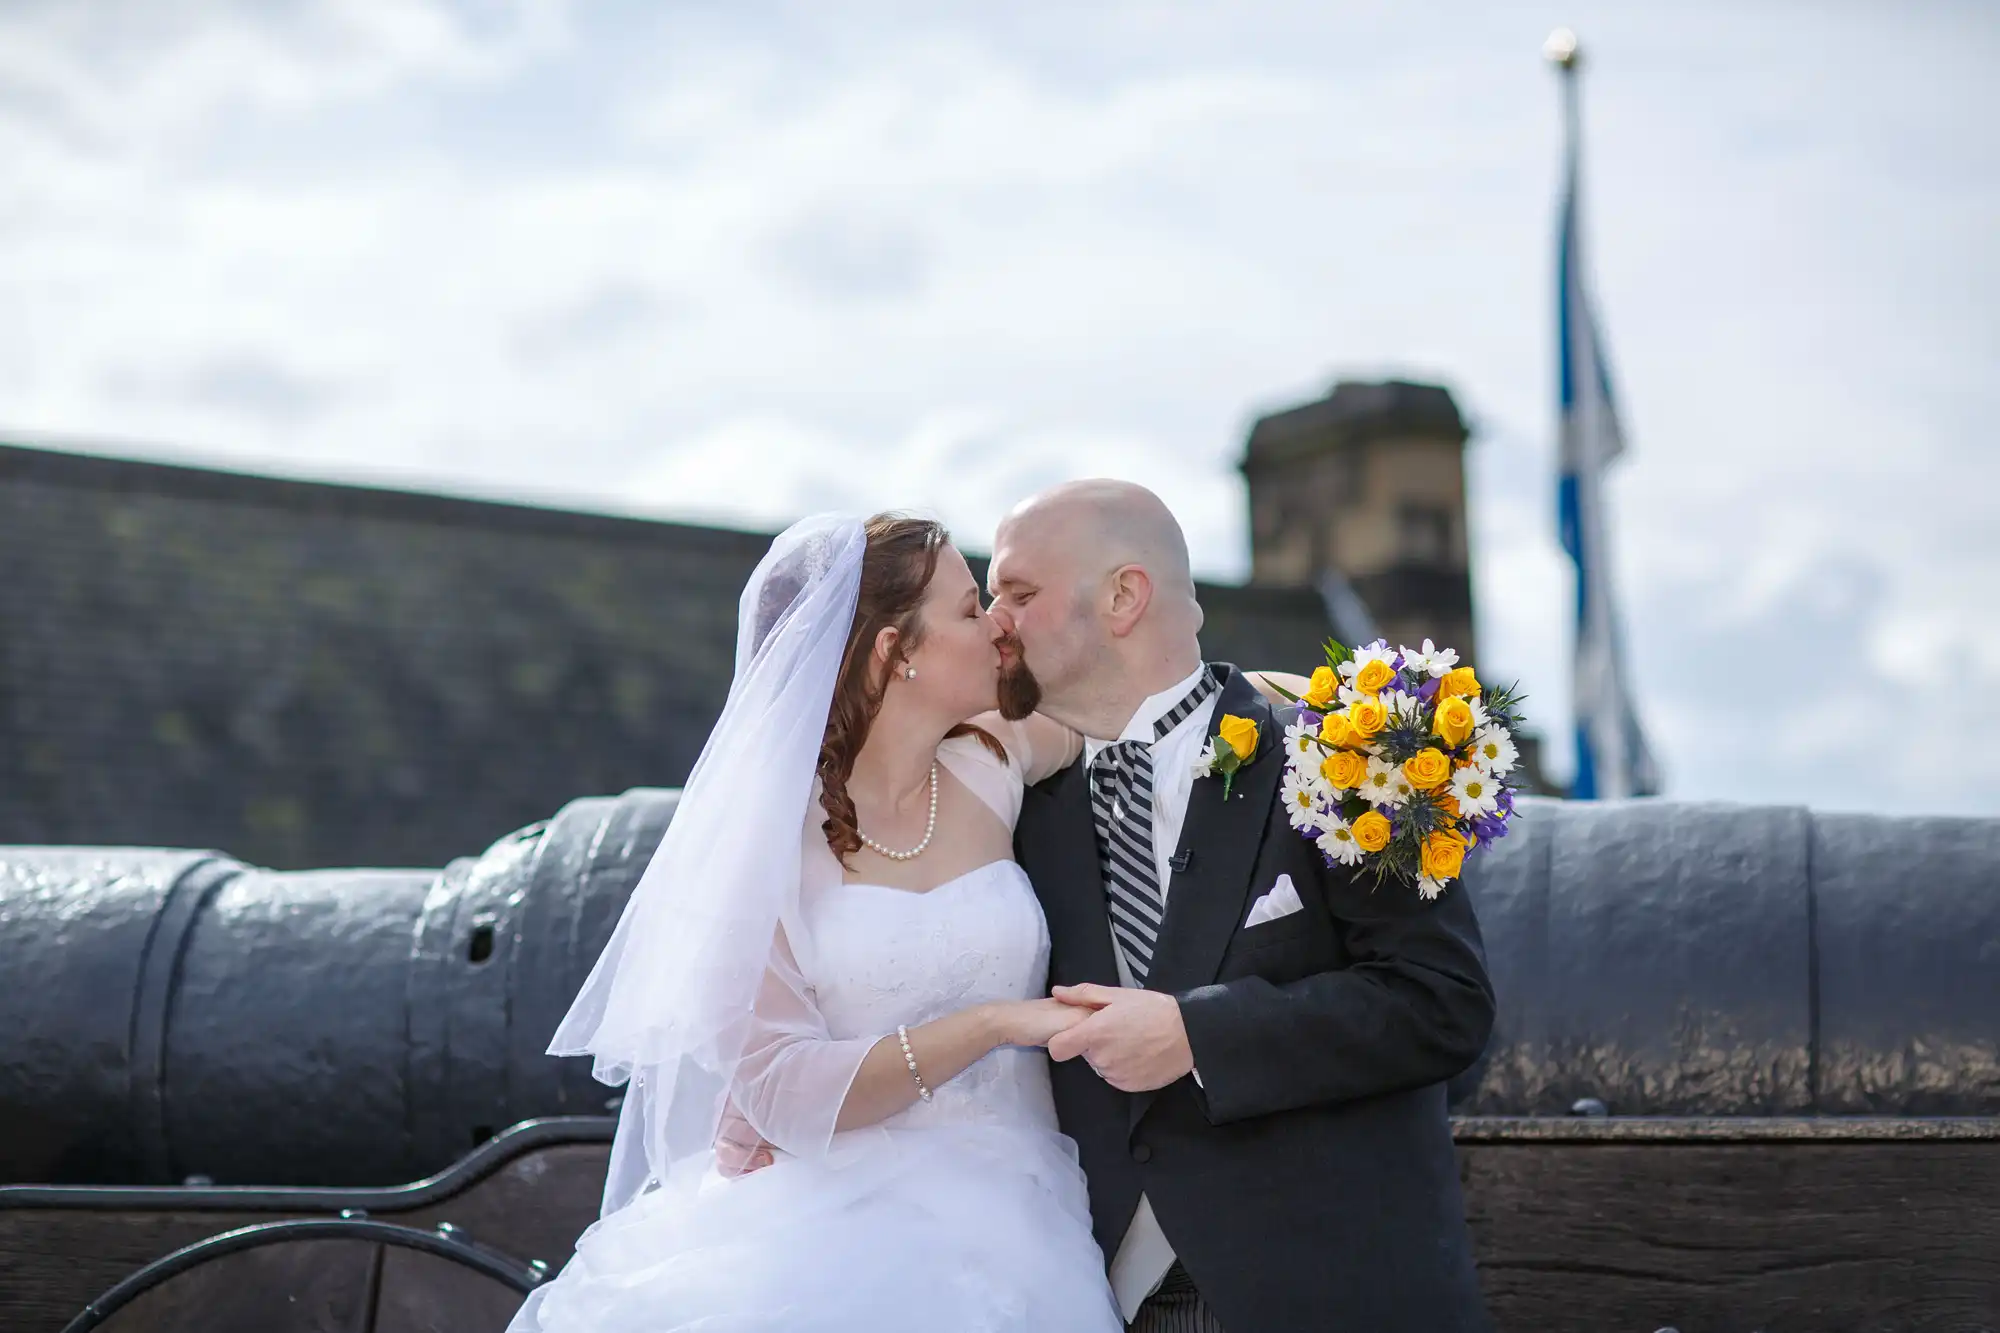 Bride and groom kissing beside a cannon, with a castle and a flag in the background, under a cloudy sky.